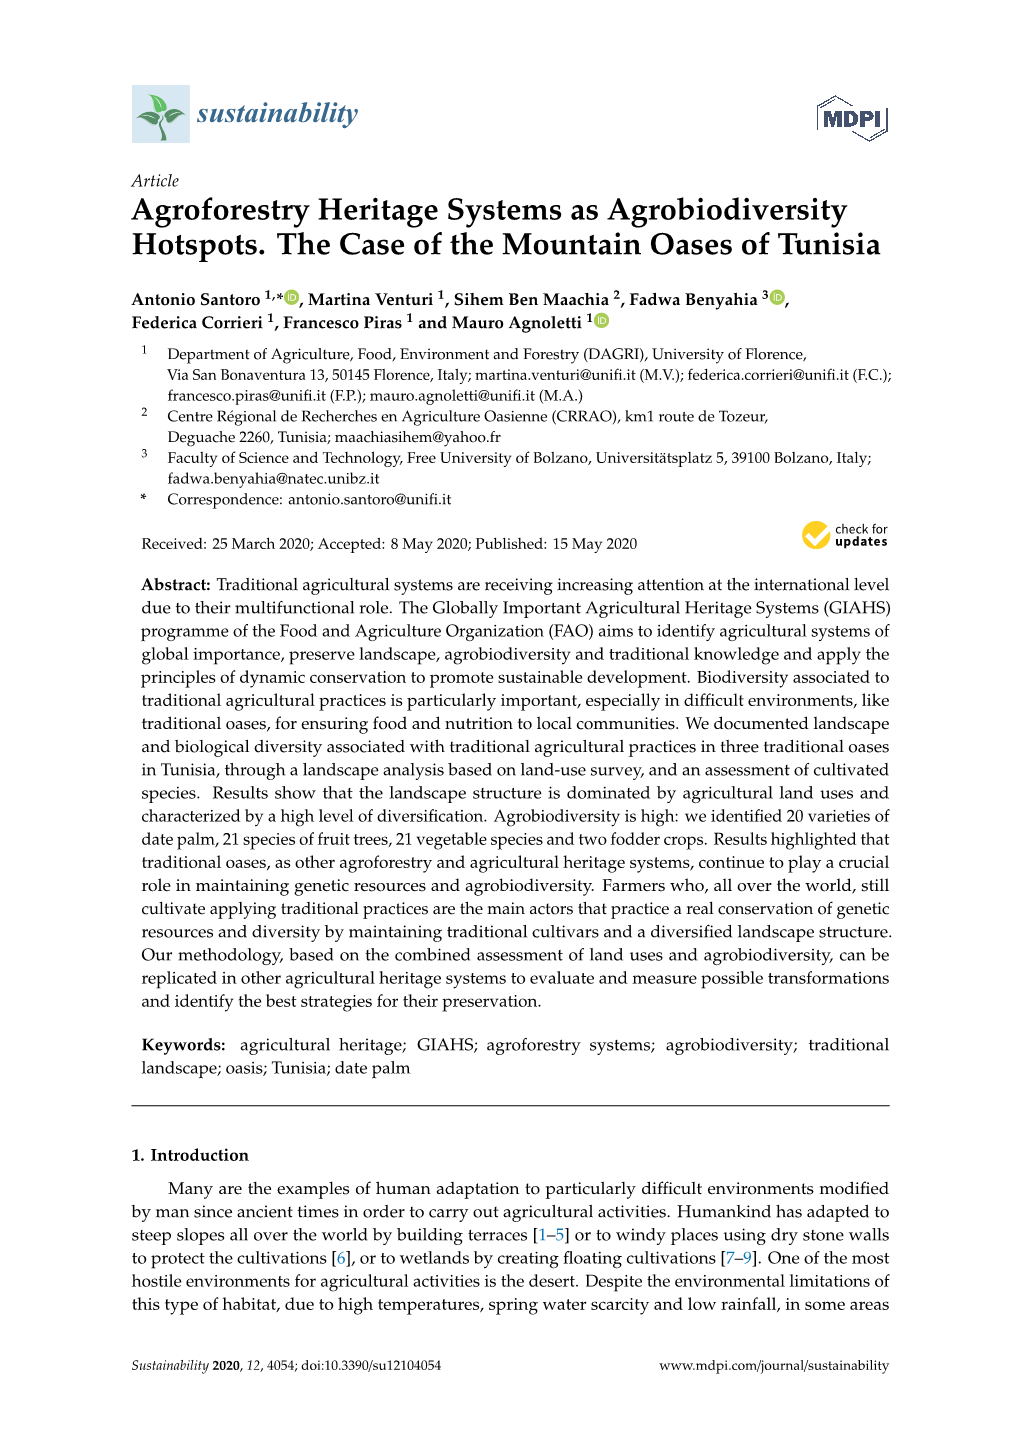 Agroforestry Heritage Systems As Agrobiodiversity Hotspots. the Case of the Mountain Oases of Tunisia